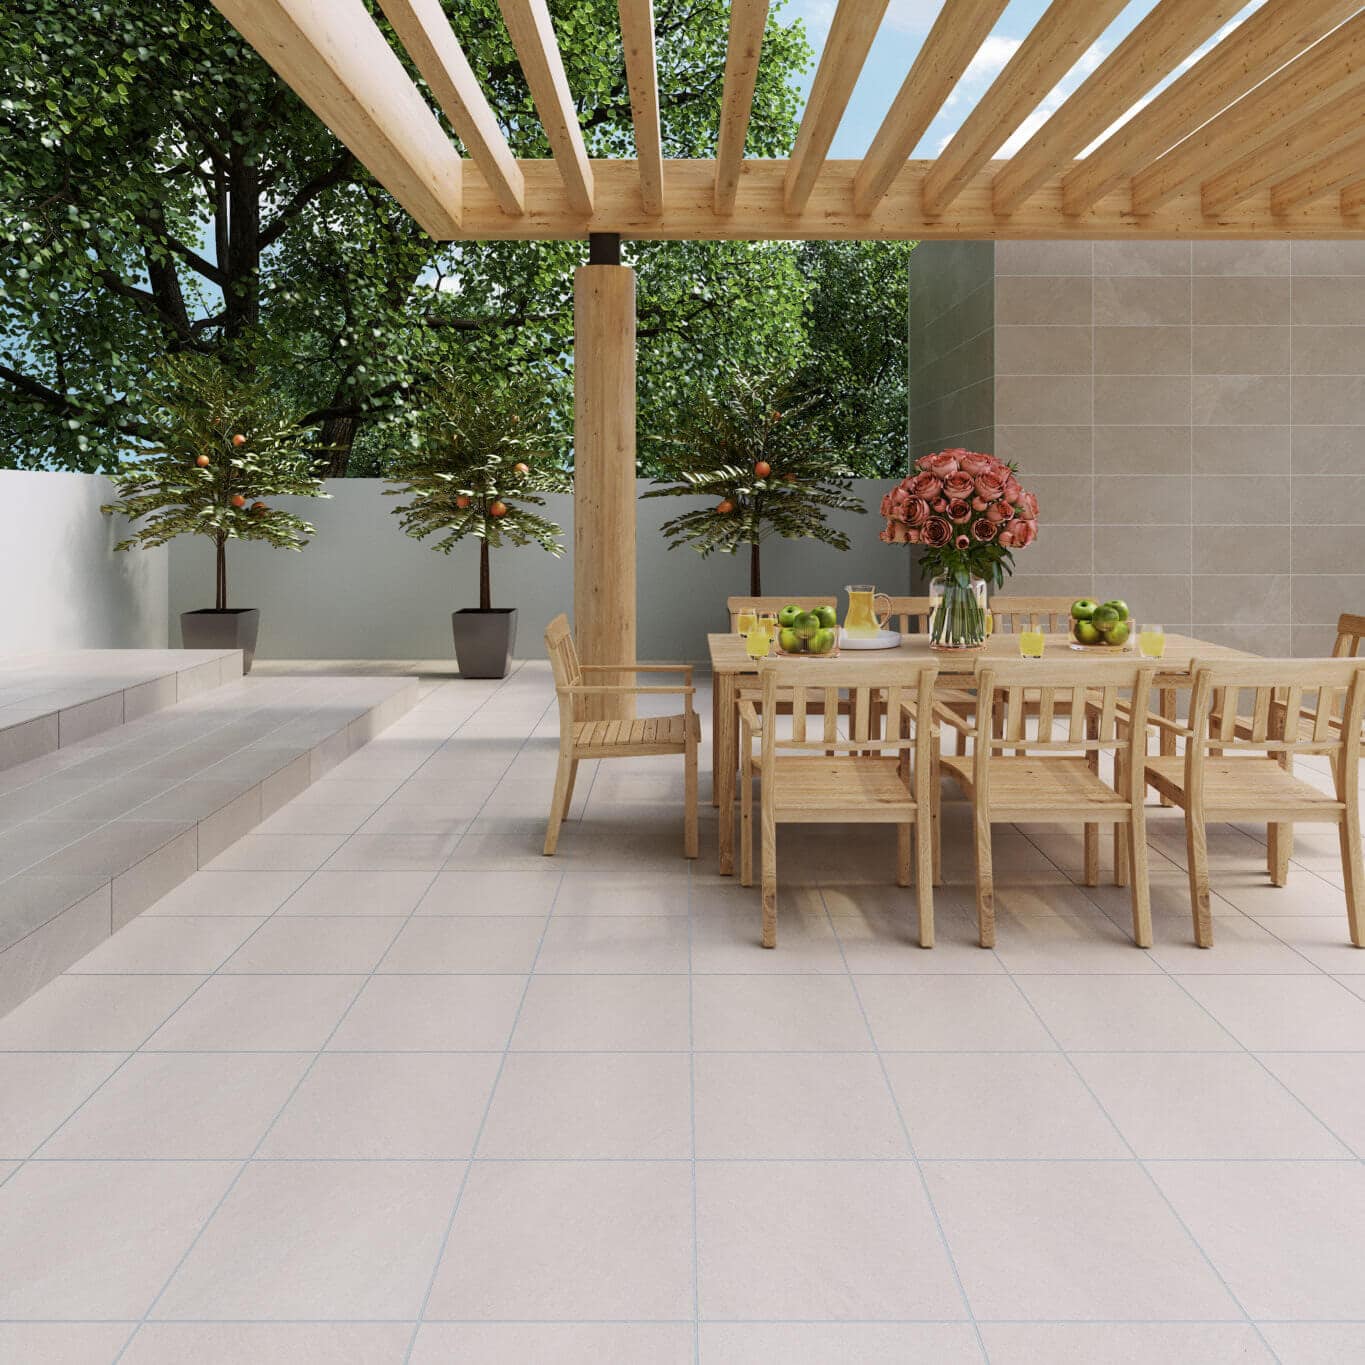 Outdoor dining patio space with cream tile flooring